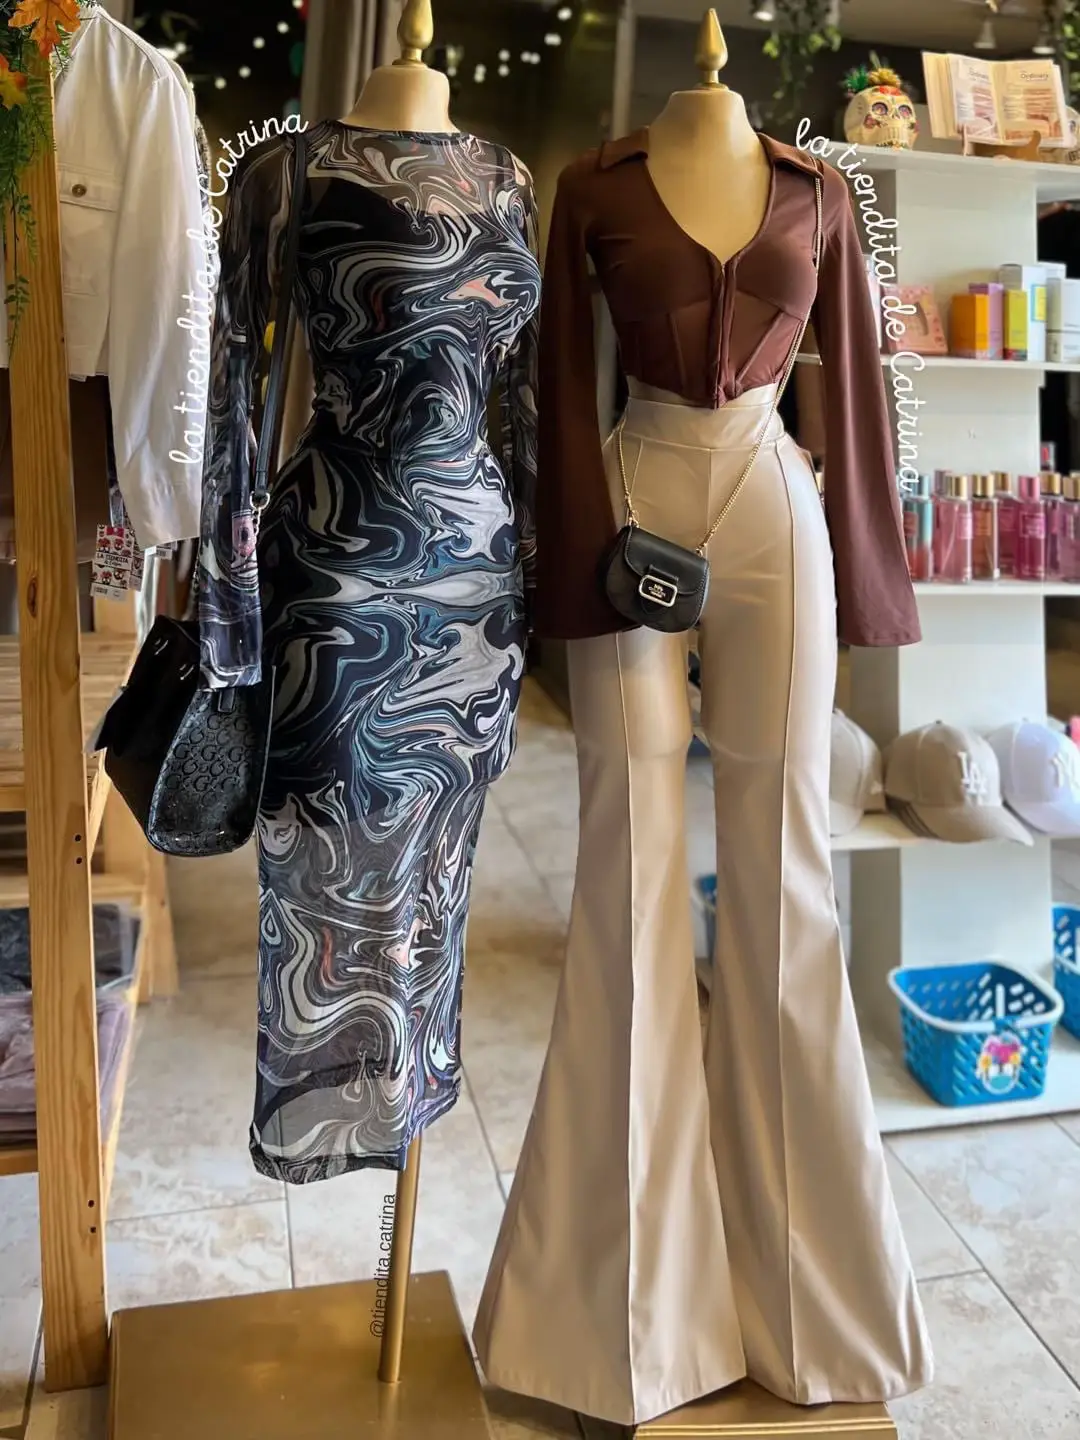  Two mannequins wearing dresses in a store.